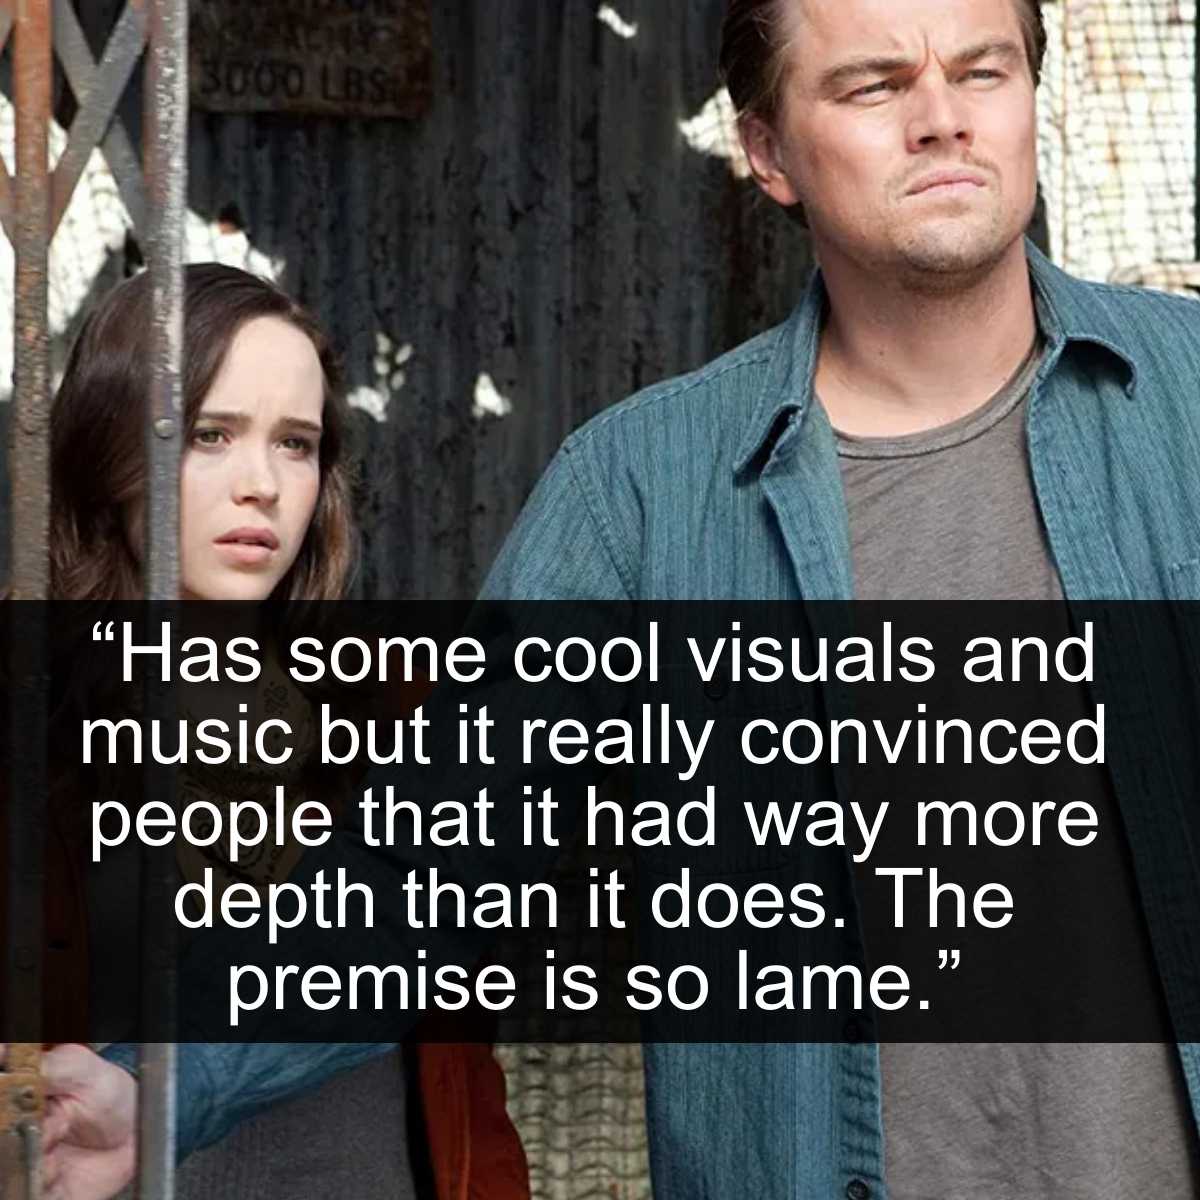 <p>Inception is an okay movie at its best. Visually, it's a trip and a half to watch. However, it strangles itself with its complexity. **While the idea of diving into someone's consciousness and playing with people's thought processes can be fun, it did not have to be that deep. **If you take away all the different levels and sequences, it's really a movie about trying to convince a spoiled brat to sell his company.</p> <p>That's the entire film. **Leonardo DiCaprio's troubles at home have nothing to do with the plot aside from driving him to commit a crime. **There could have been a lot more attention paid to the actual story instead of just seeing how far these people could really go into someone else's mind.</p>